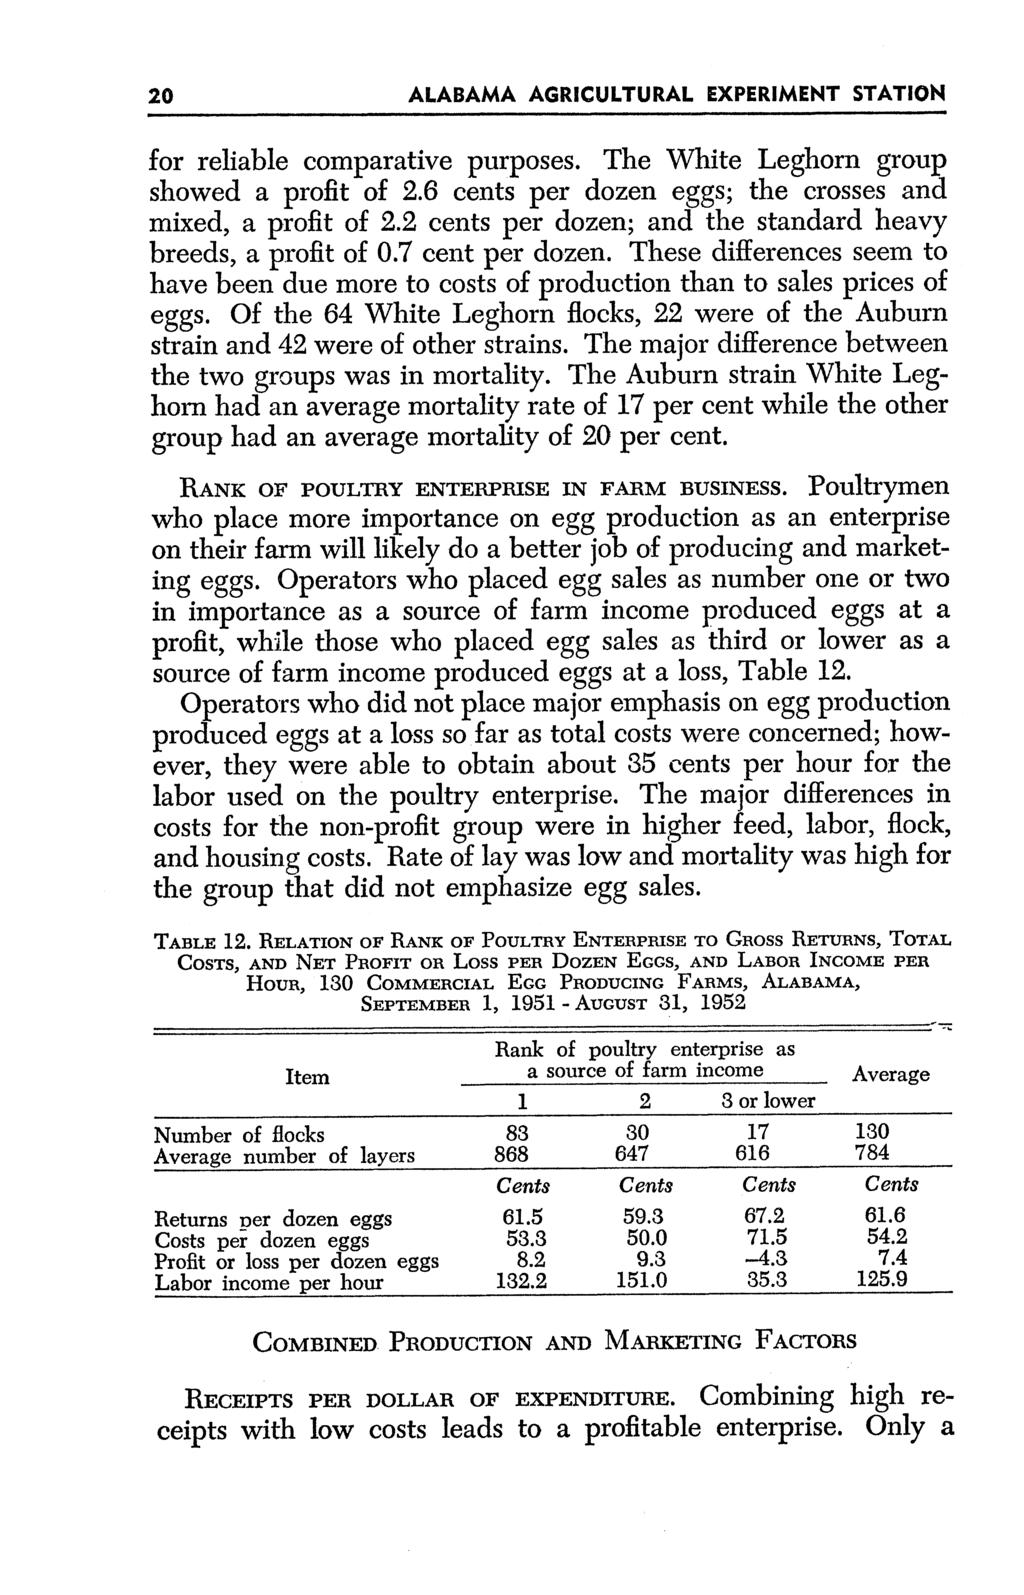 20 ALABAMA AGRICULTURAL EXPERIMENT STATION for reliable comparative purposes. The White Leghorn group showed a profit of 2.6 cents per dozen eggs; the crosses and mixed, a profit of 2.